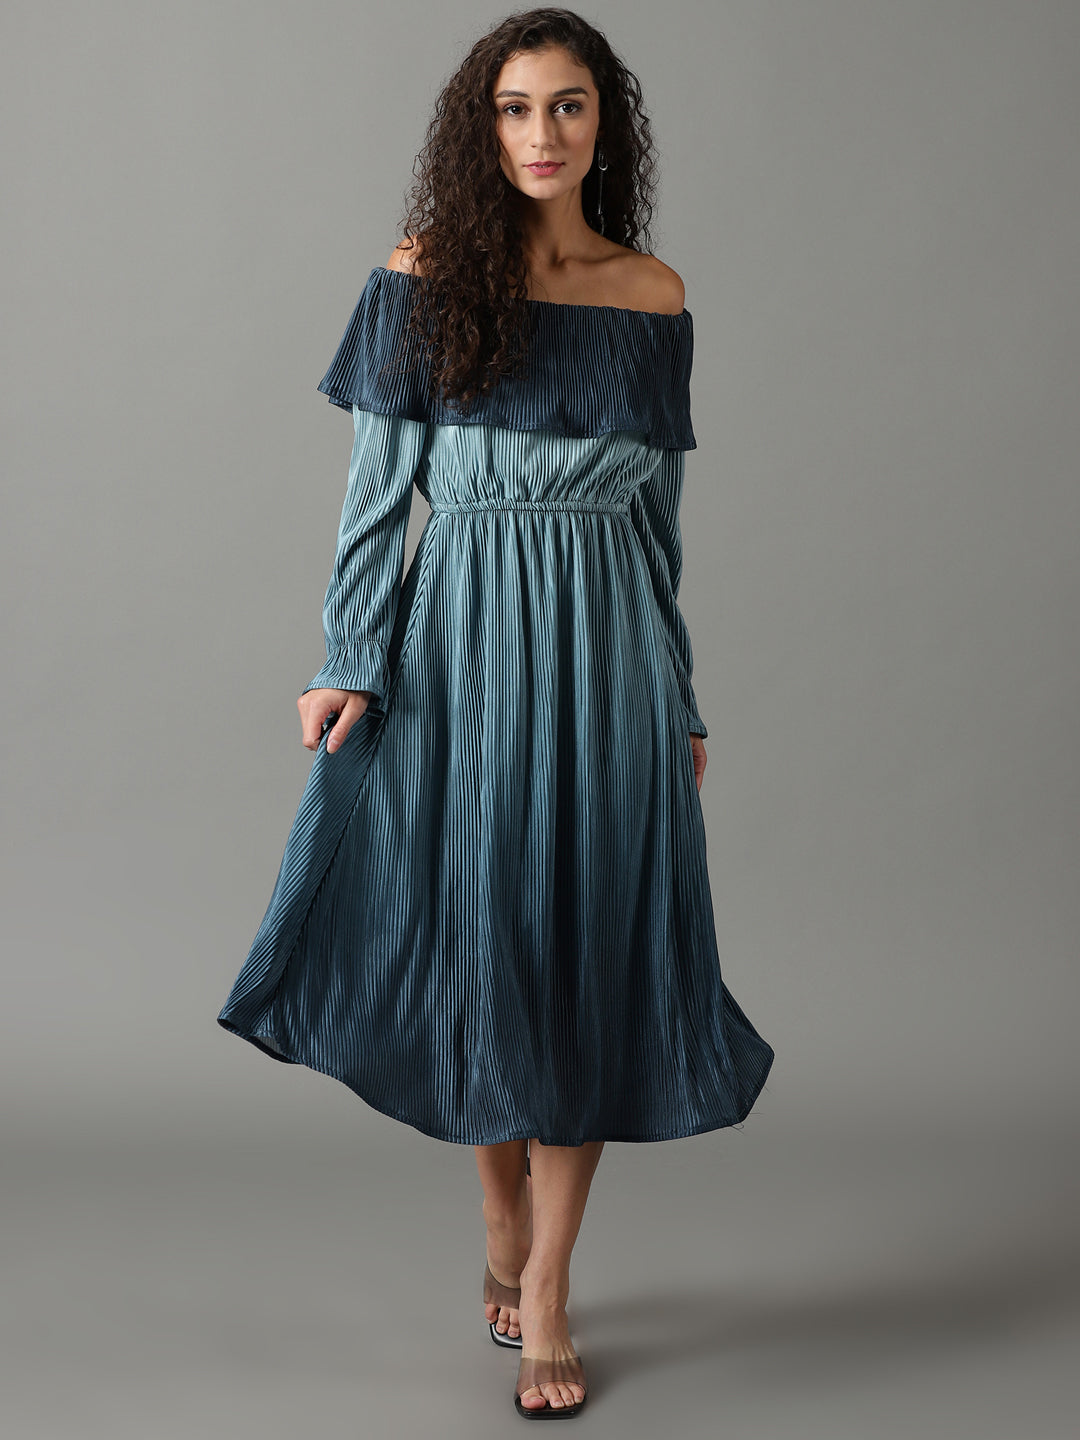 Women's Teal Solid Fit and Flare Dress